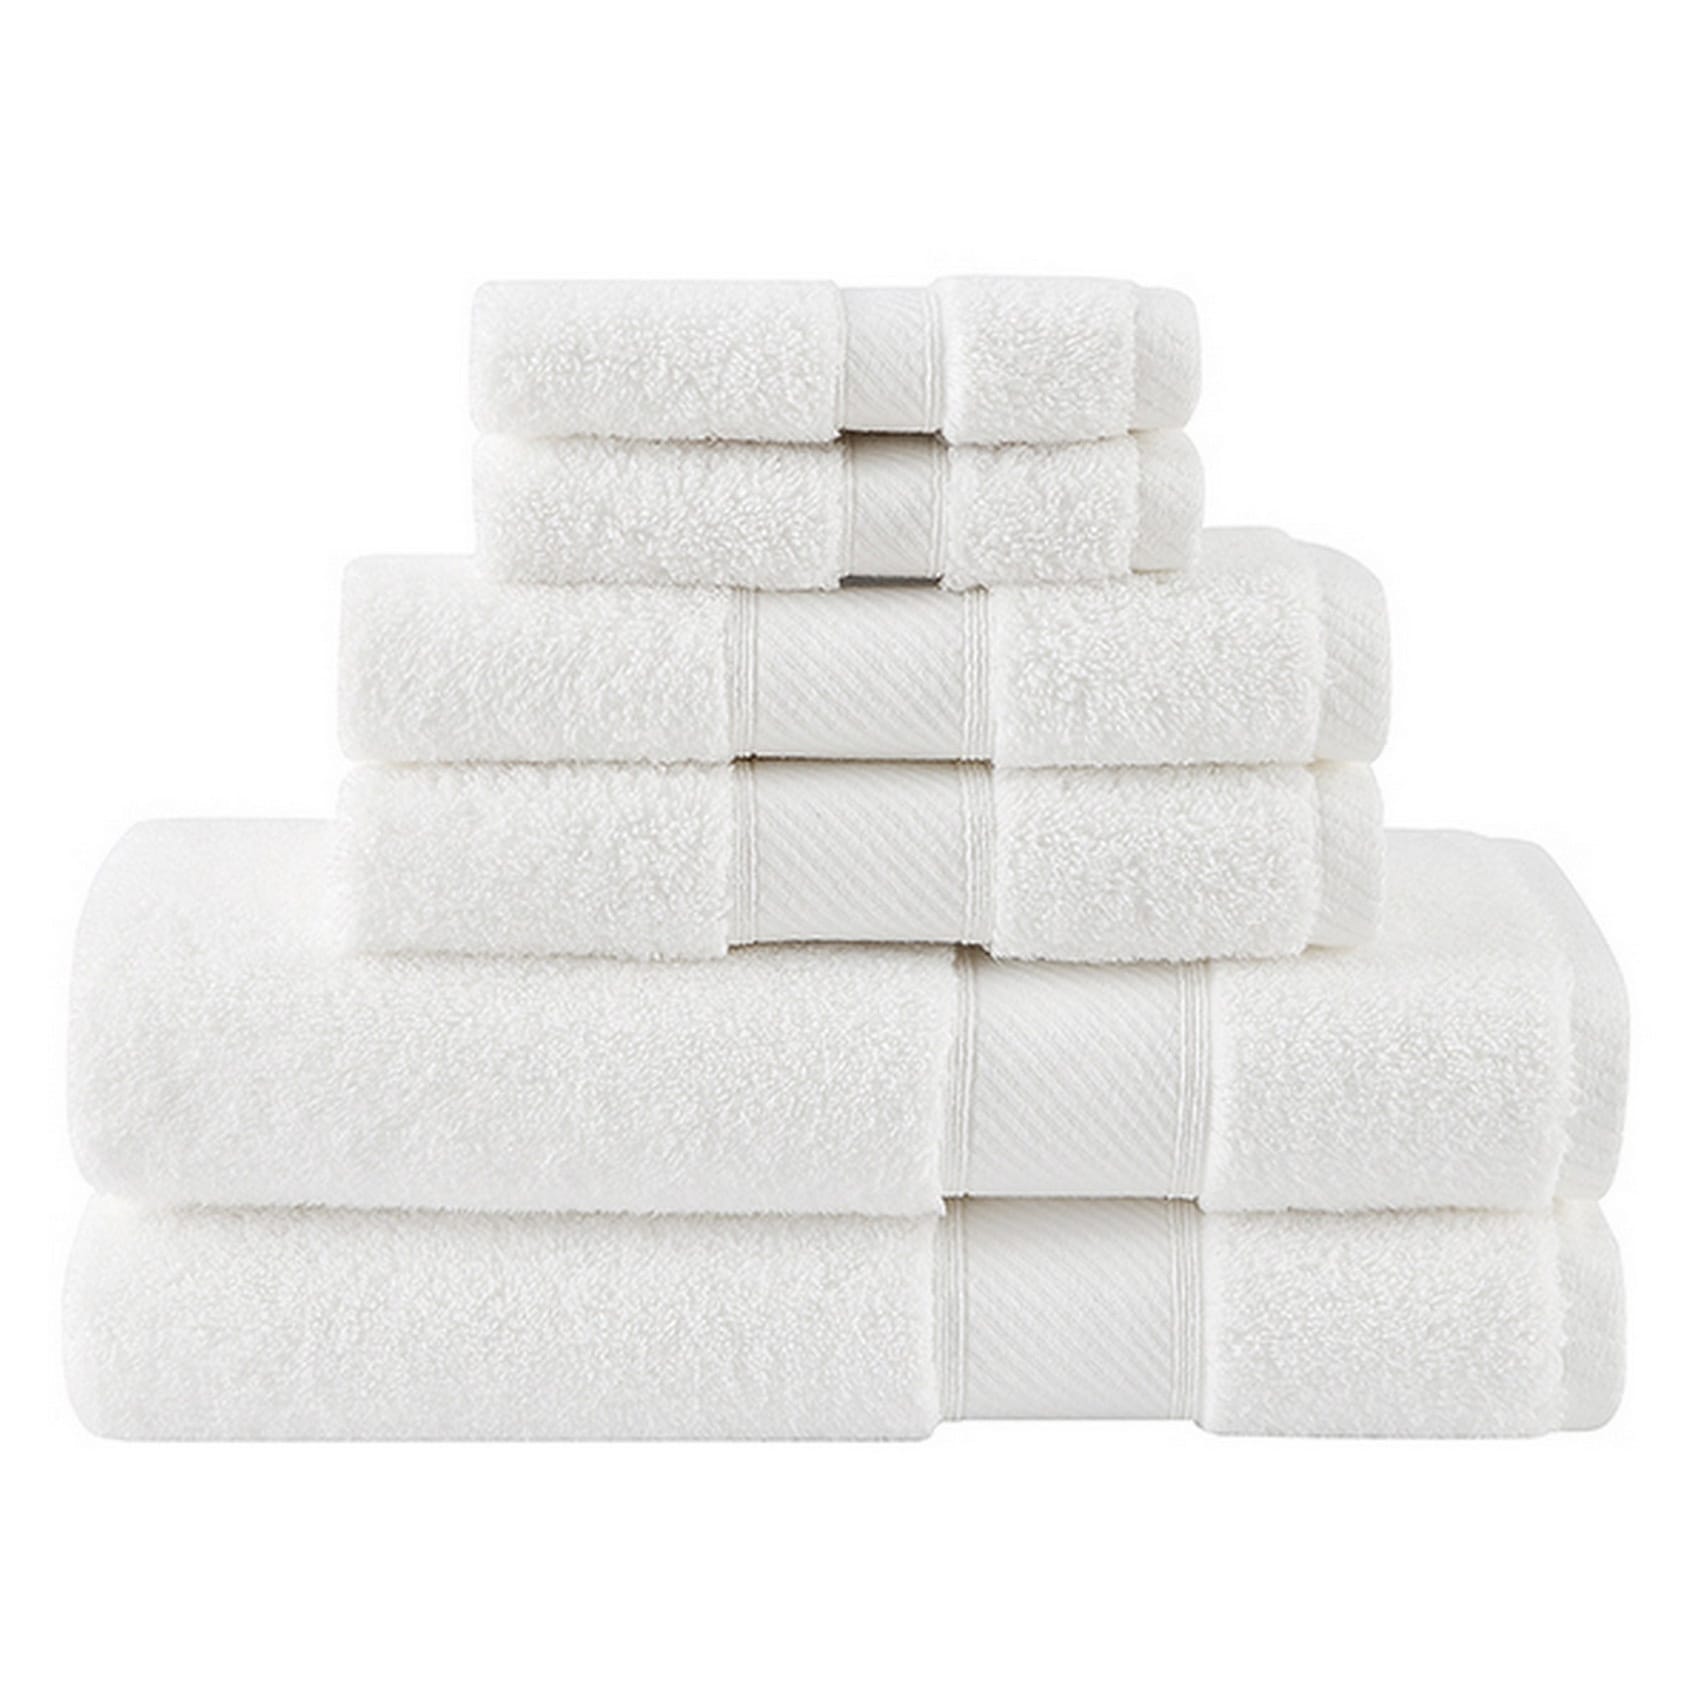 https://ak1.ostkcdn.com/images/products/17982488/Charisma-Classic-II-Towel-Collection-Bath-Hand-Wash-Towel-Sold-Seperately-40745fa4-0136-40f4-92a4-d20e3ba36771.jpg